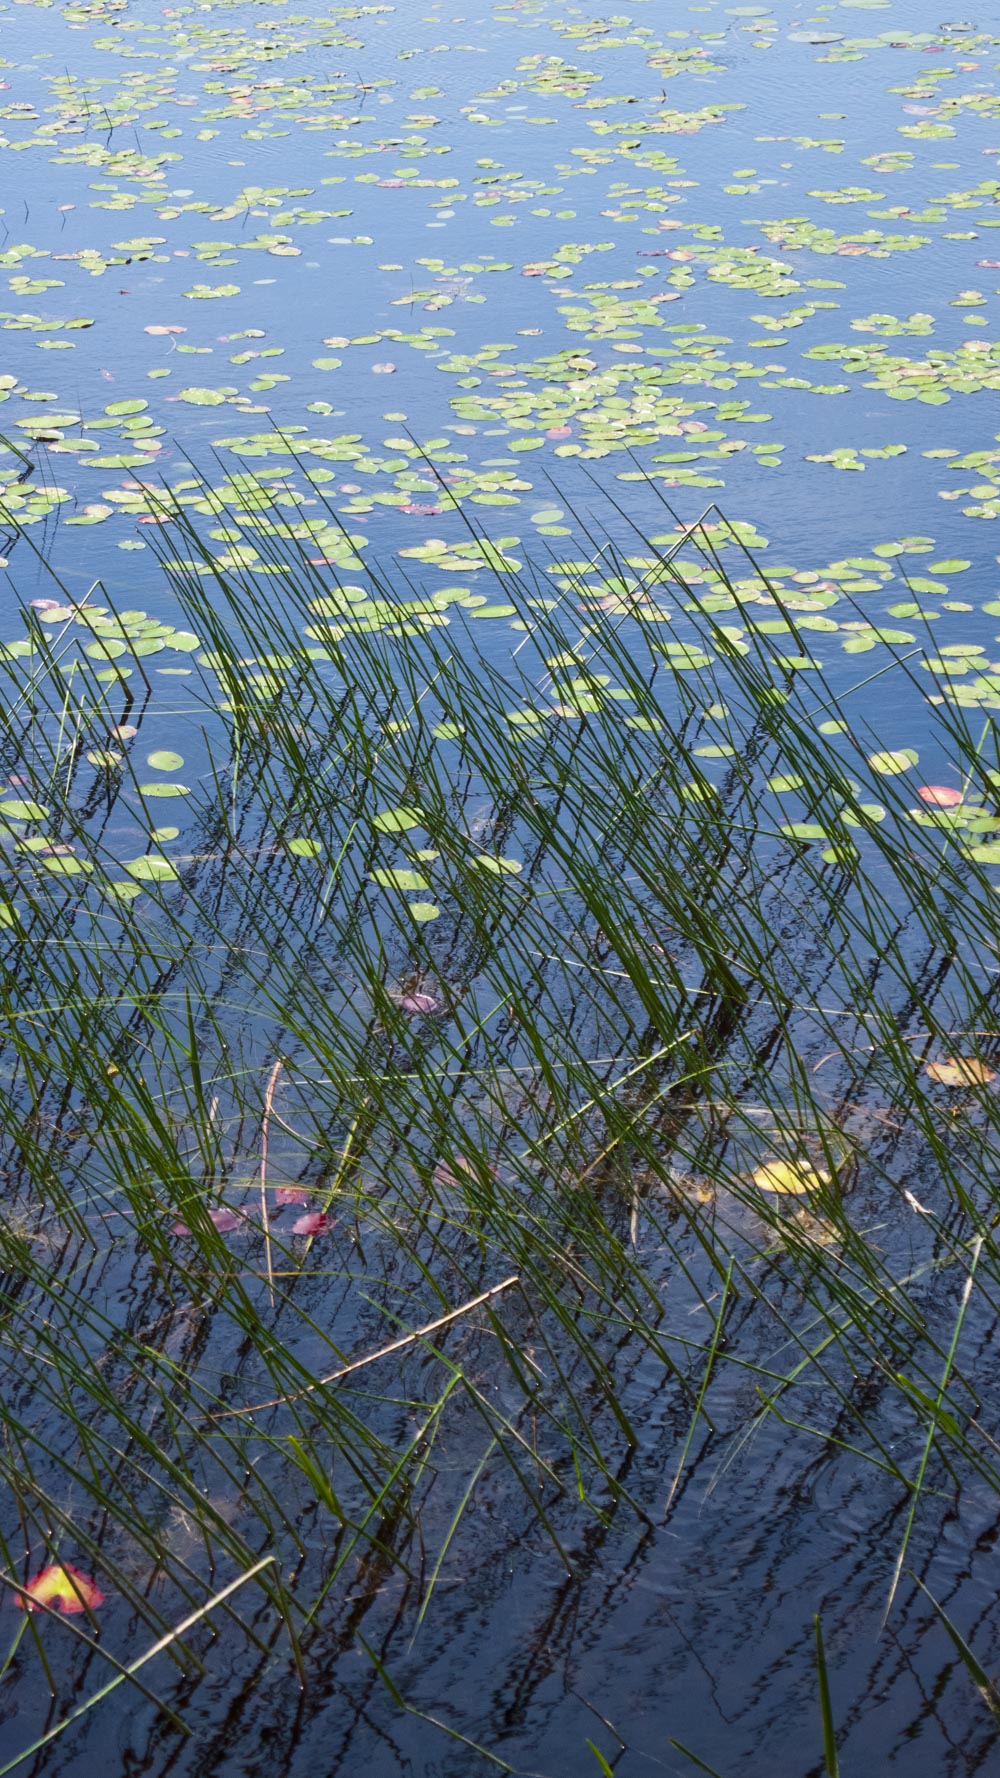 Eagle Lake Reeds: Photograph by Will Tenney